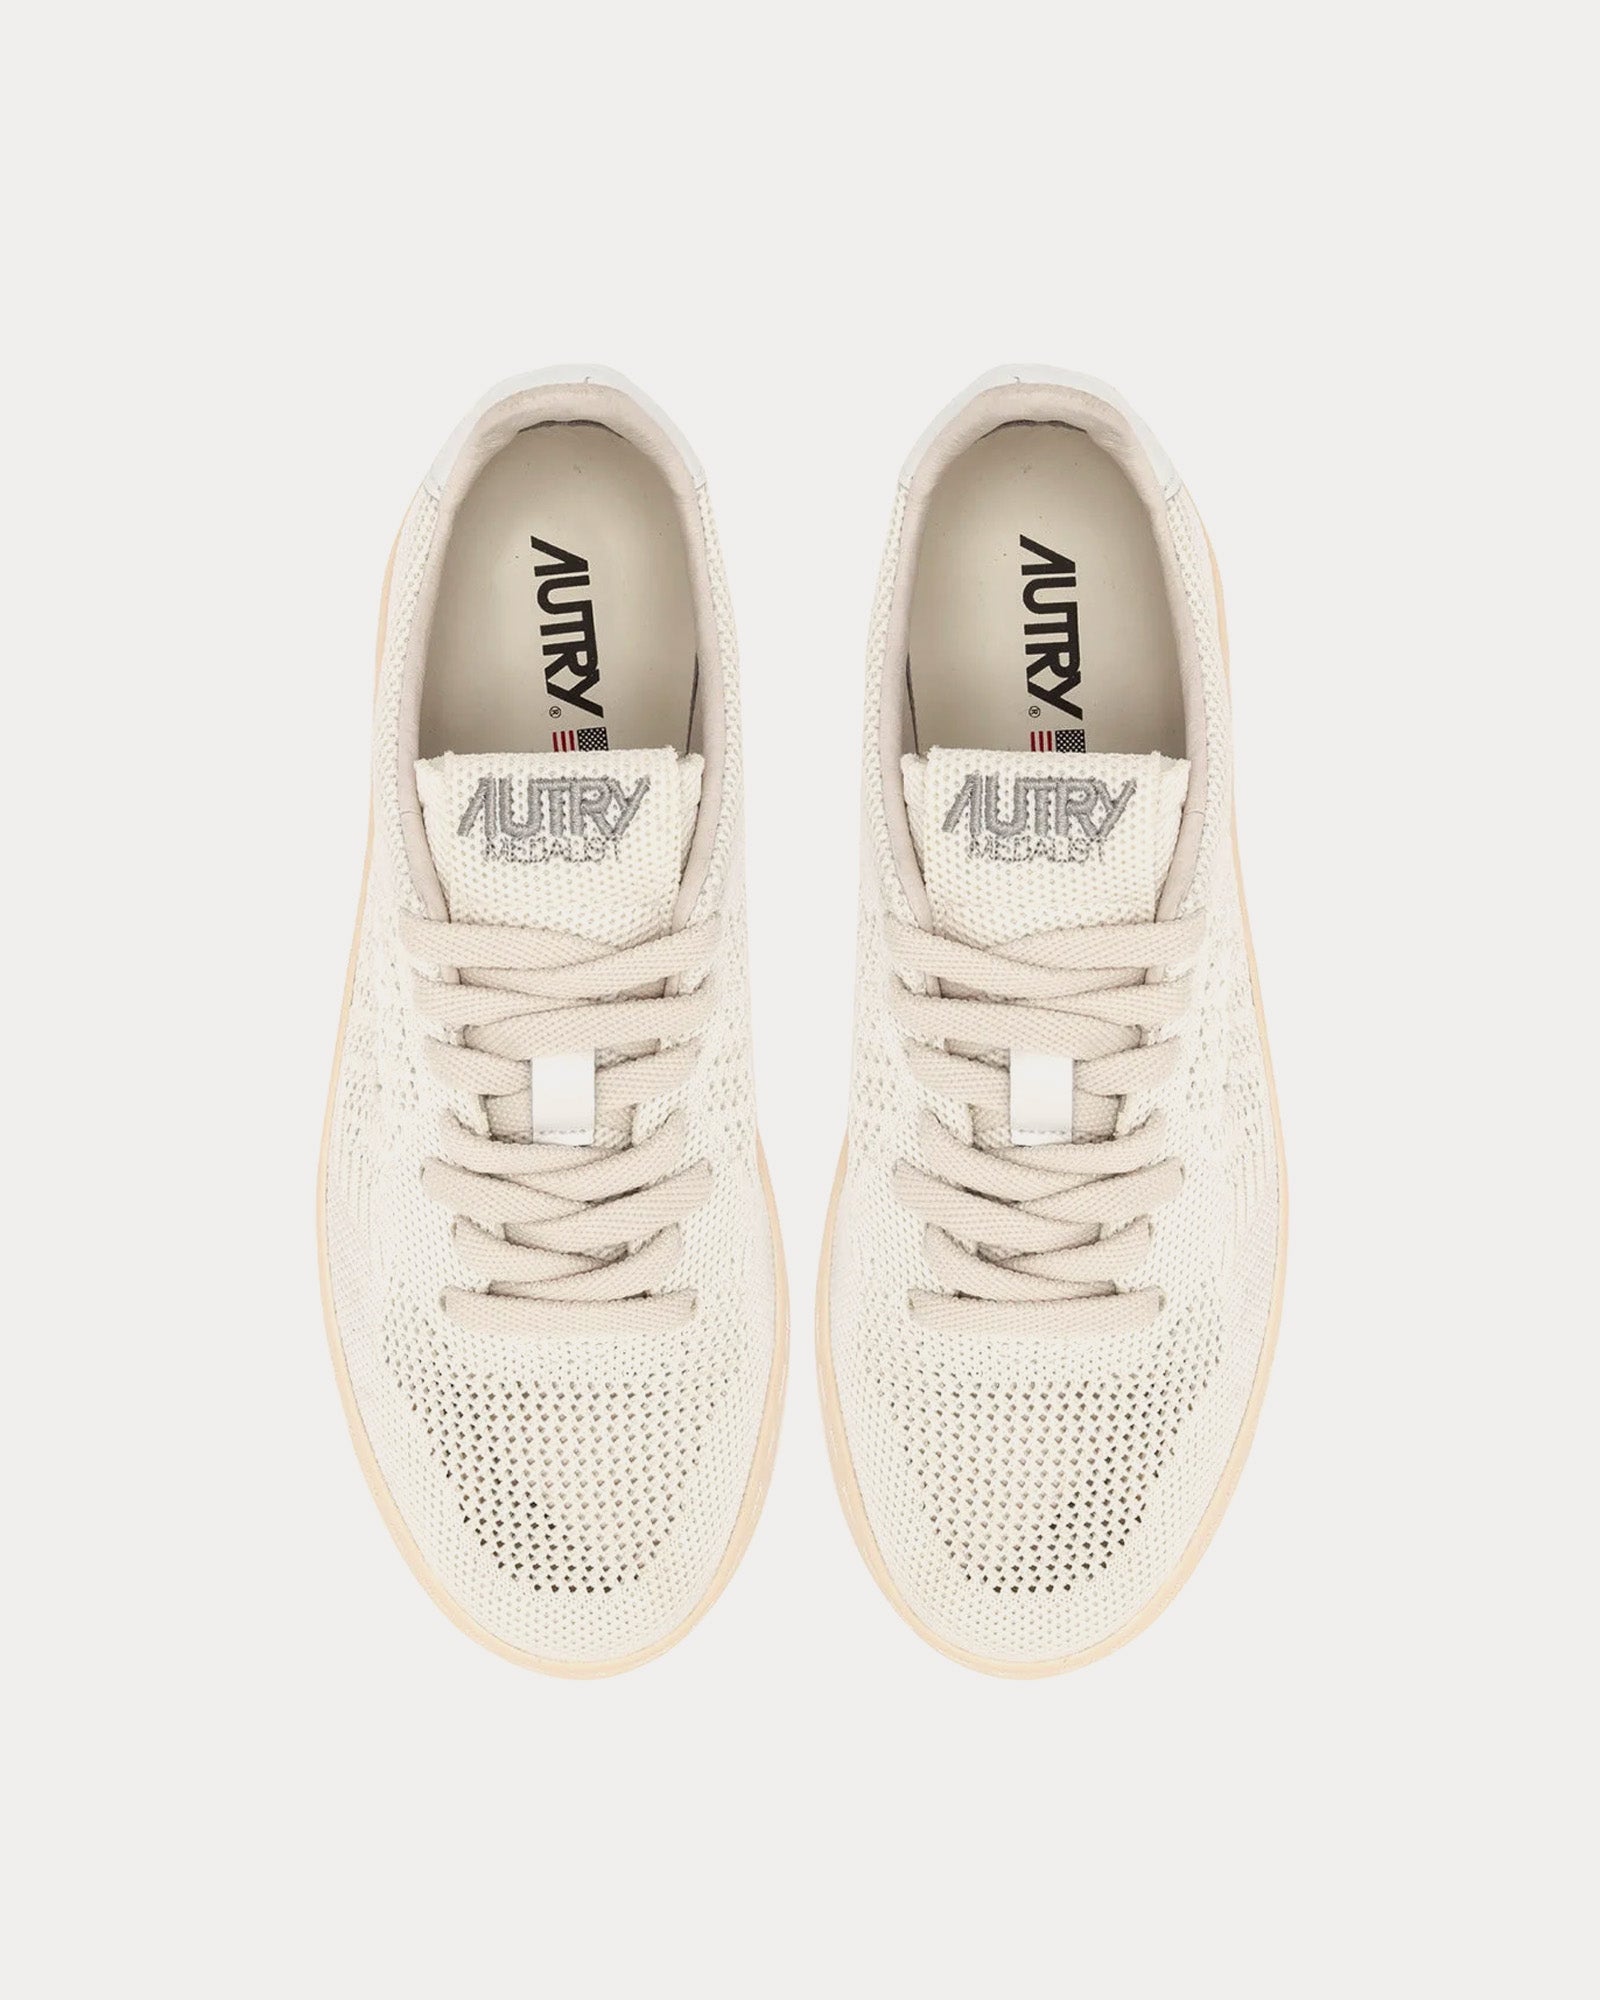 Autry - Easeknit Medalist Ivory Low Top Sneakers